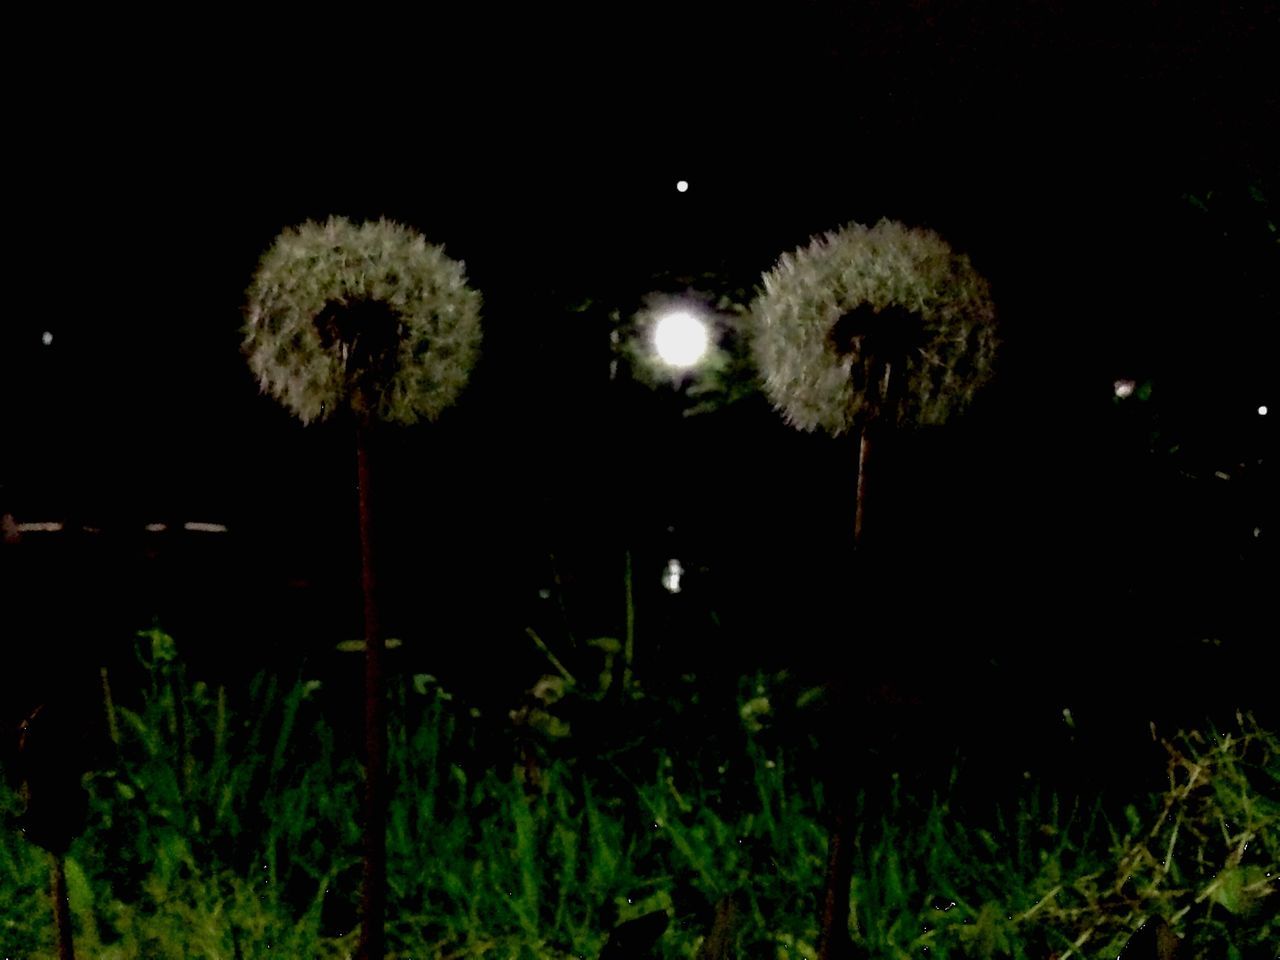 night, growth, nature, beauty in nature, plant, illuminated, dandelion, field, tranquility, tree, outdoors, sky, green color, flower, freshness, no people, tranquil scene, low angle view, growing, uncultivated